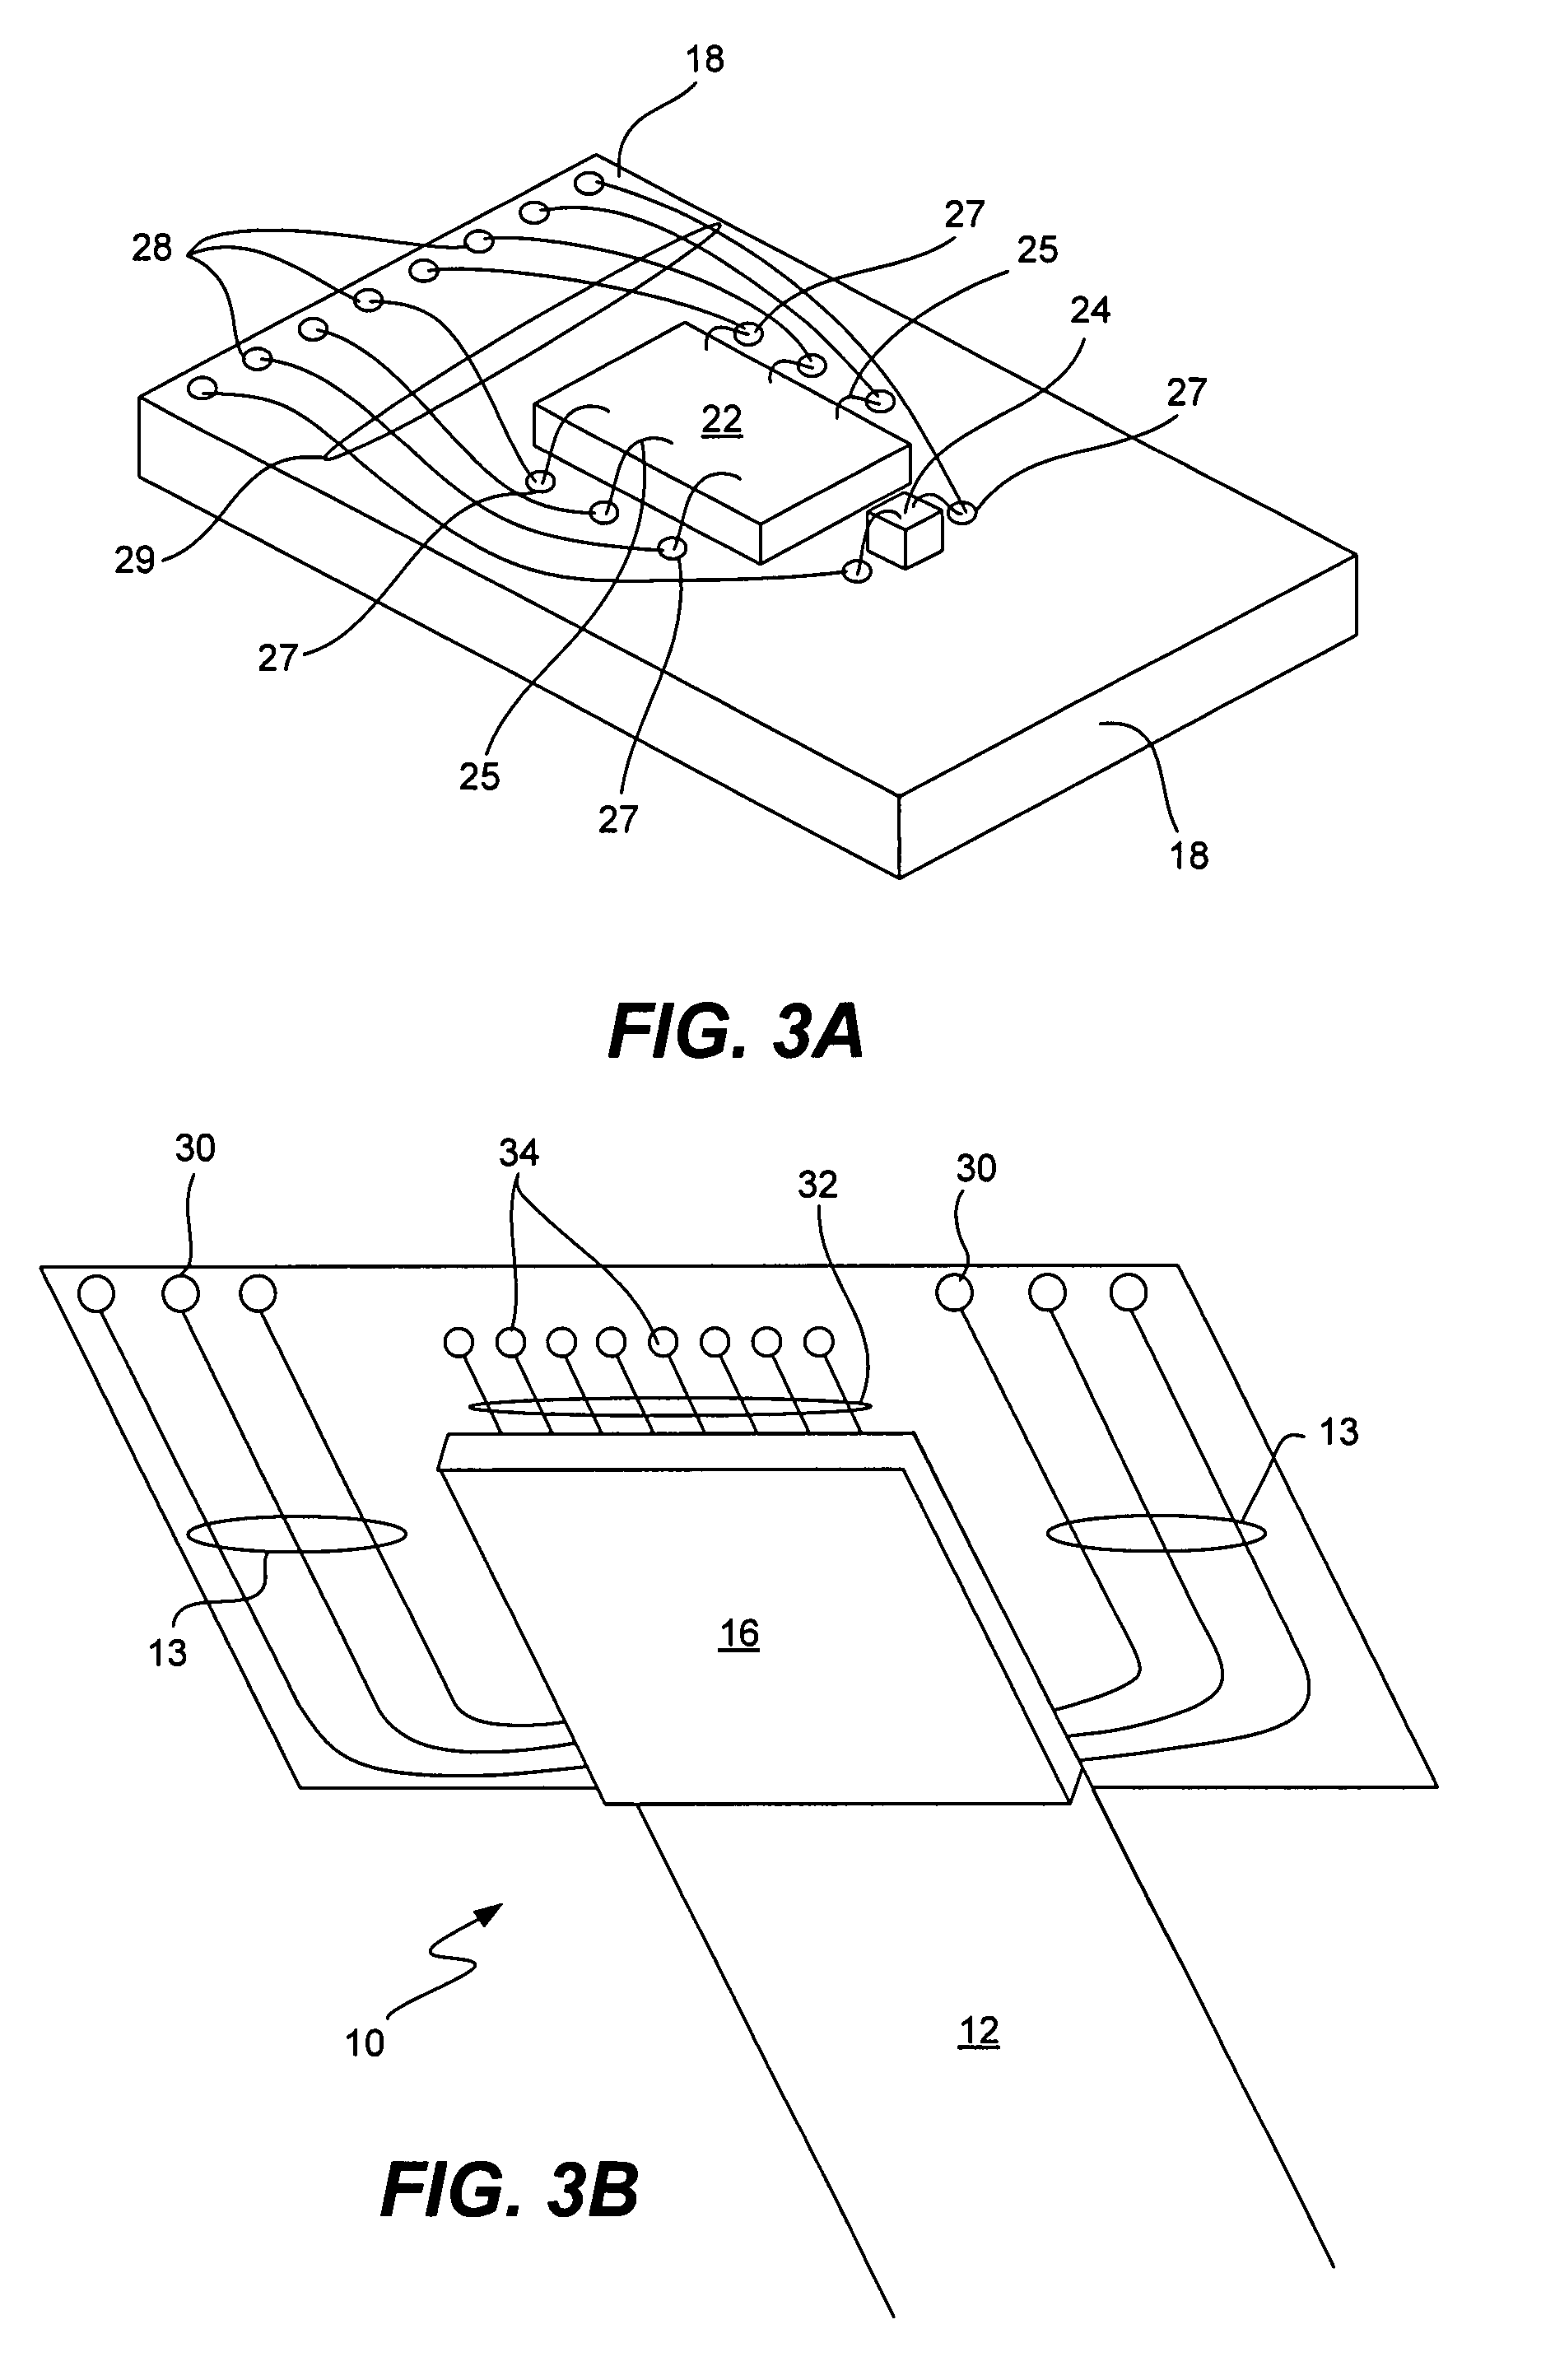 Optical-electrical flex interconnect using a flexible waveguide and flexible printed circuit board substrate